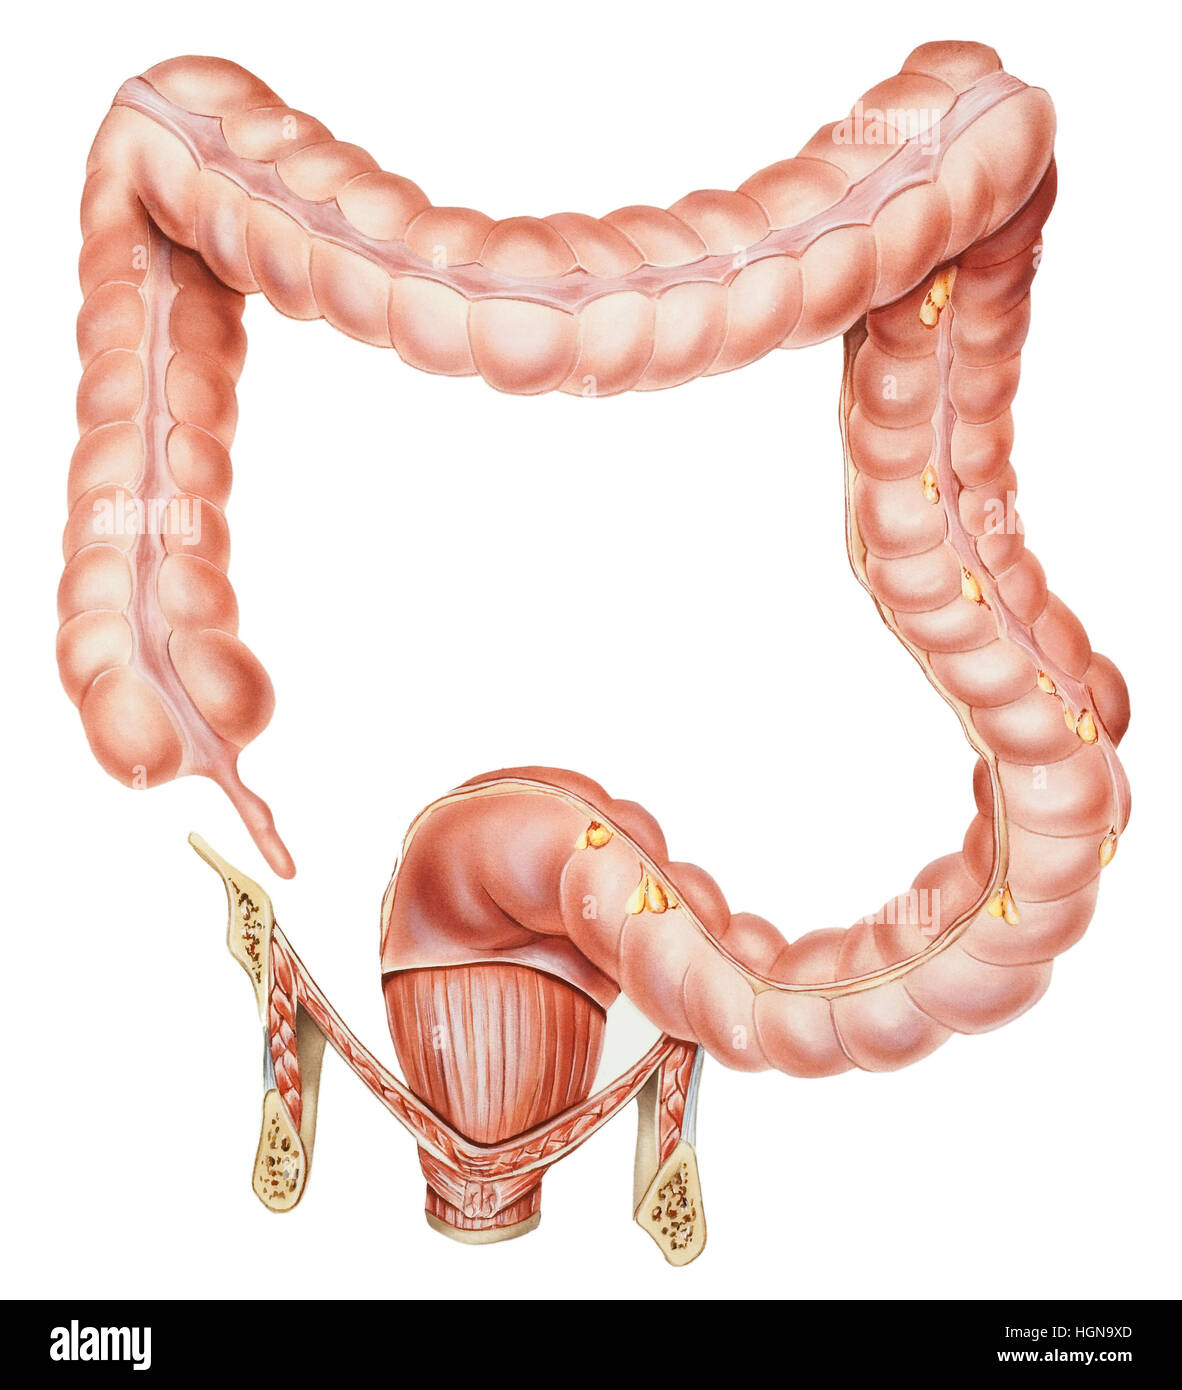 Normal human anatomy of an appendix, colon, and rectum (male or female). Stock Photo